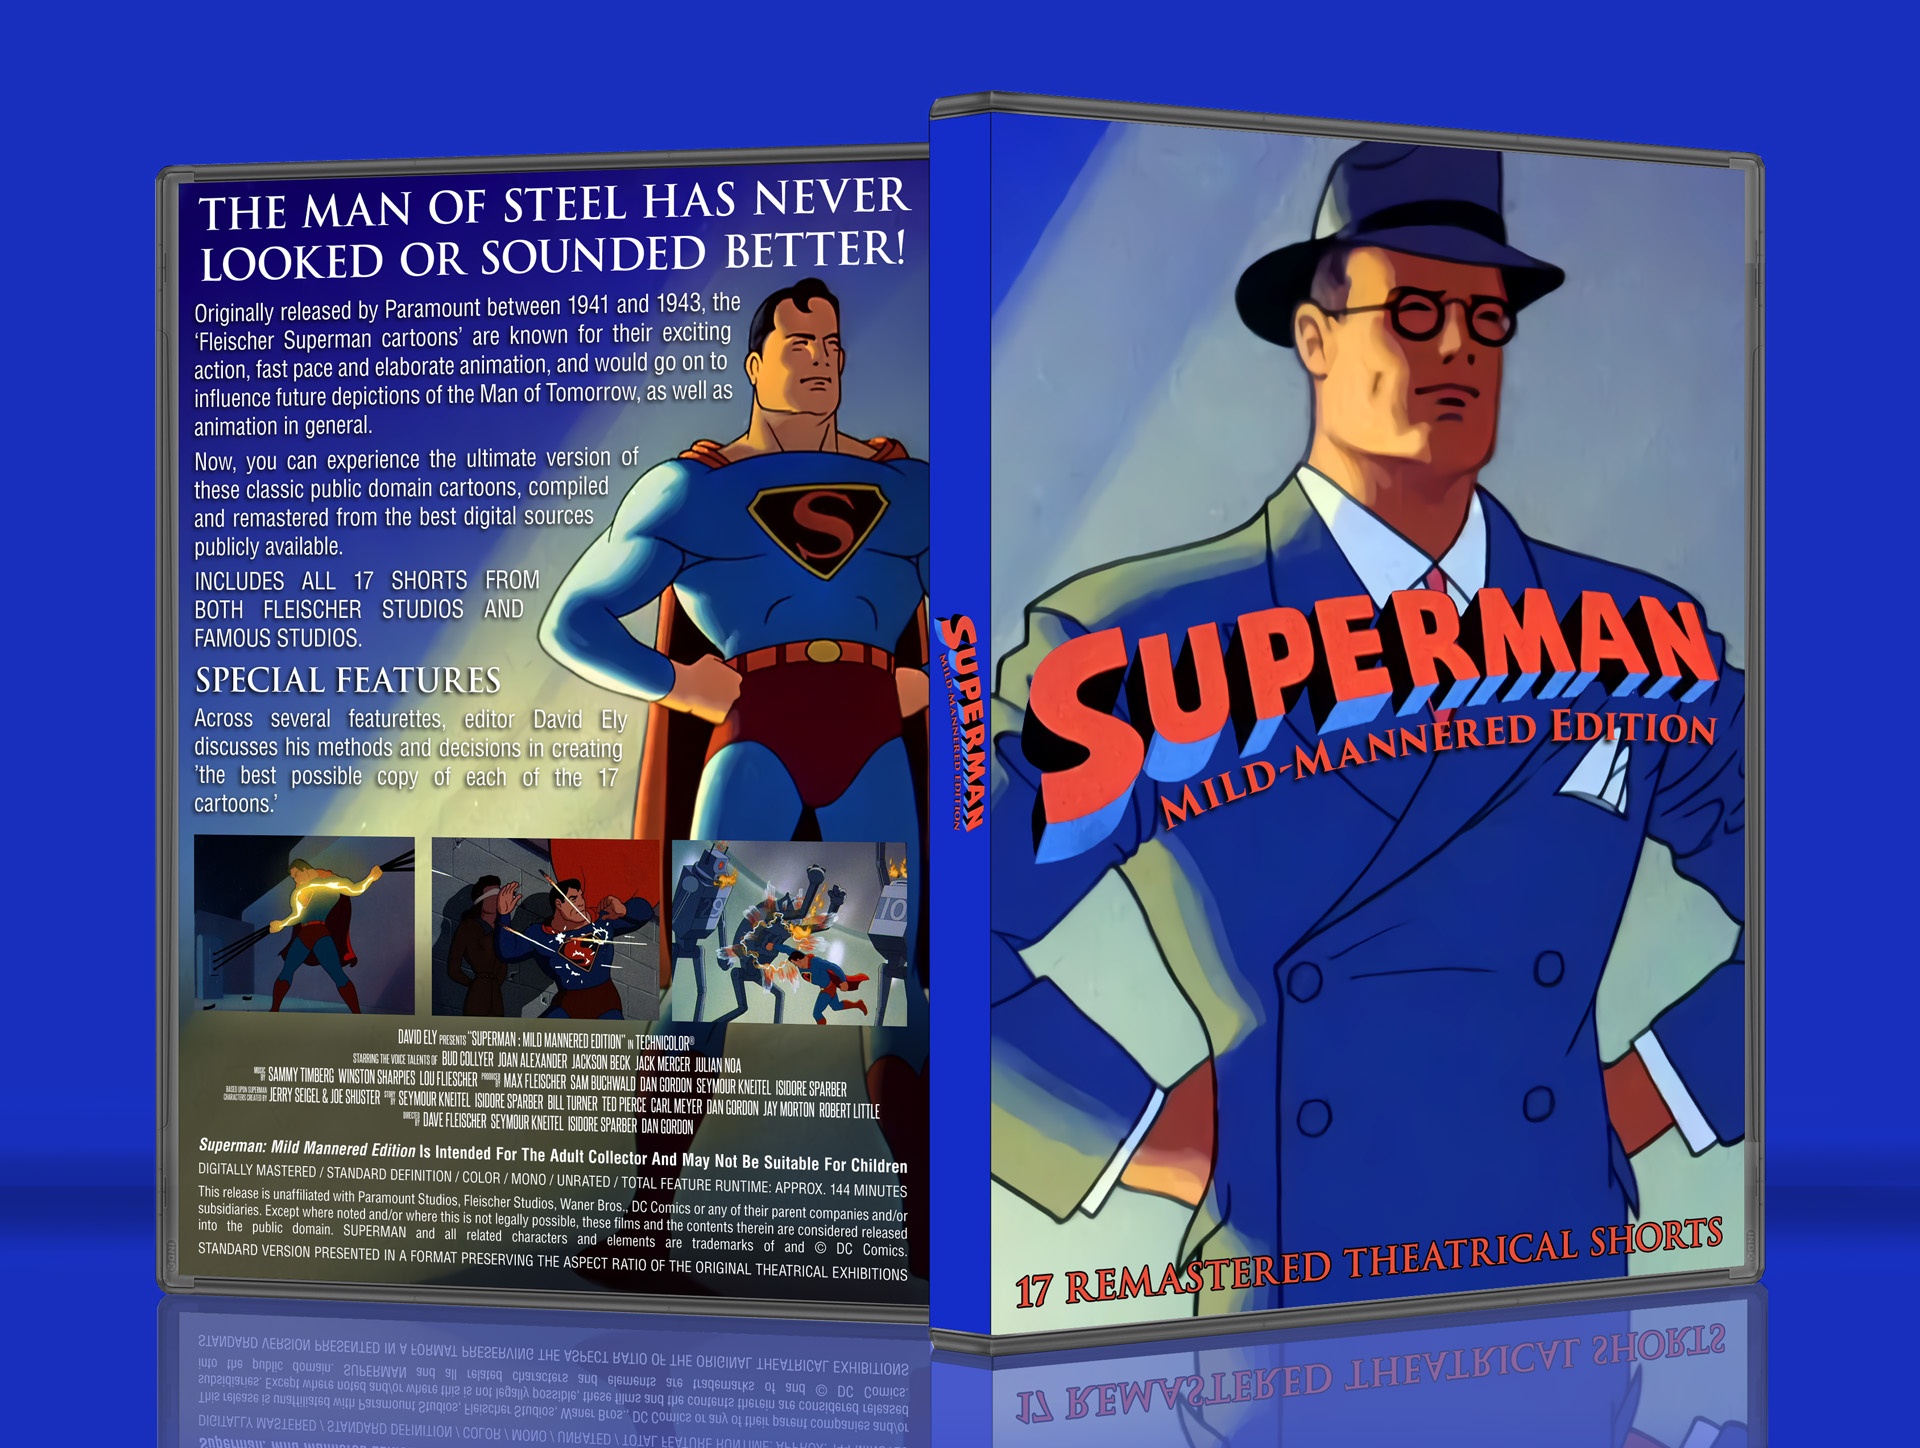 Superman: Mild-Mannered Edition box cover